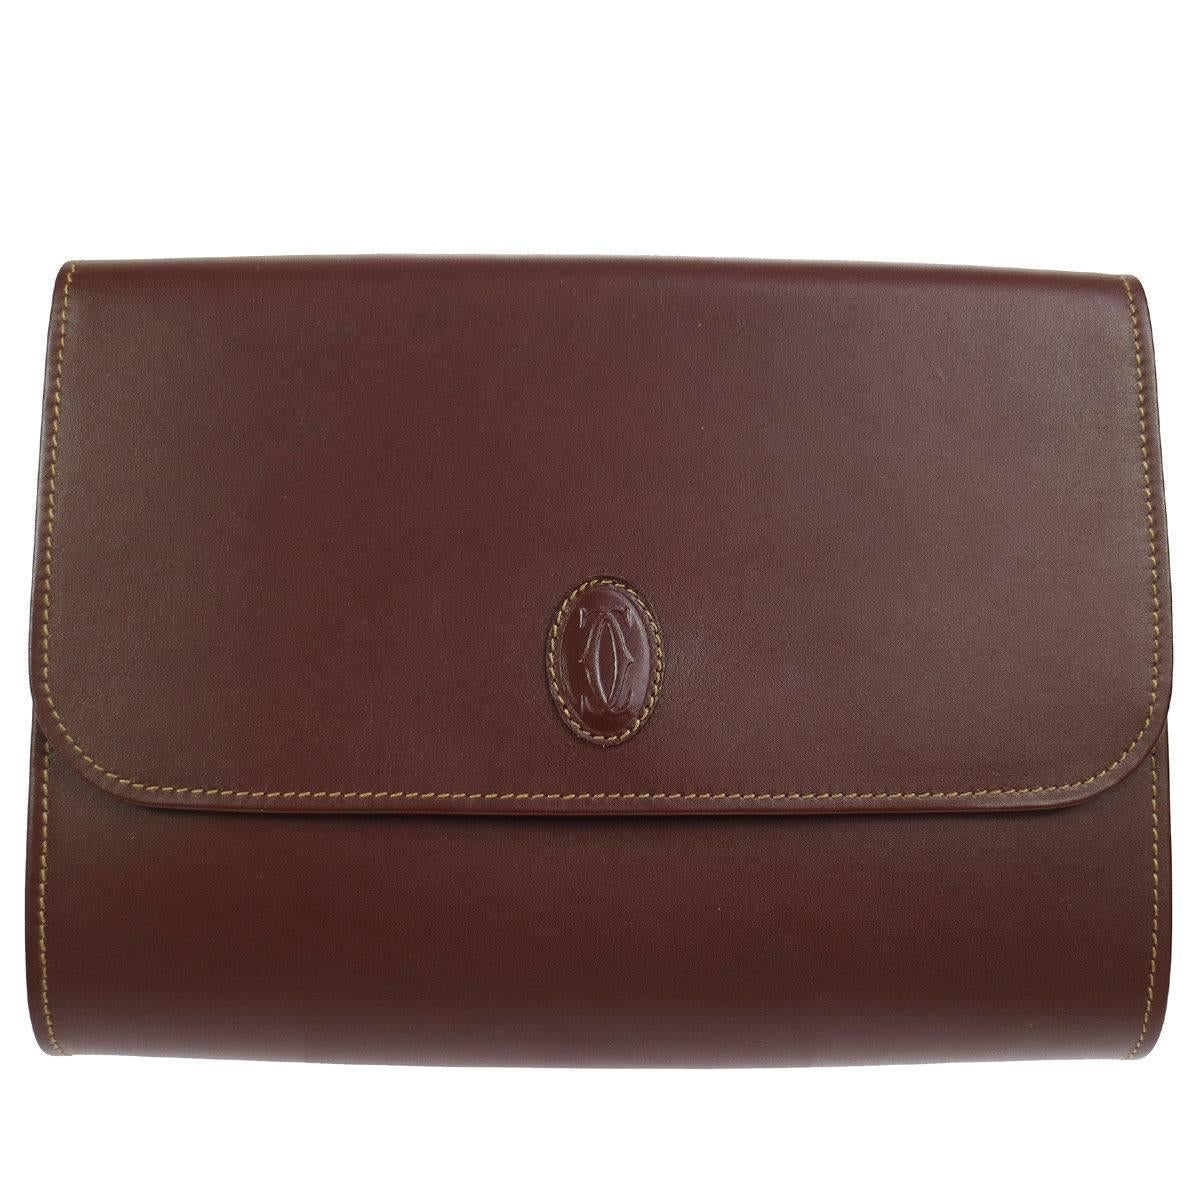 Cartier Bordeaux Leather Envelope Evening Fold Over Flap Clutch Bag in Box